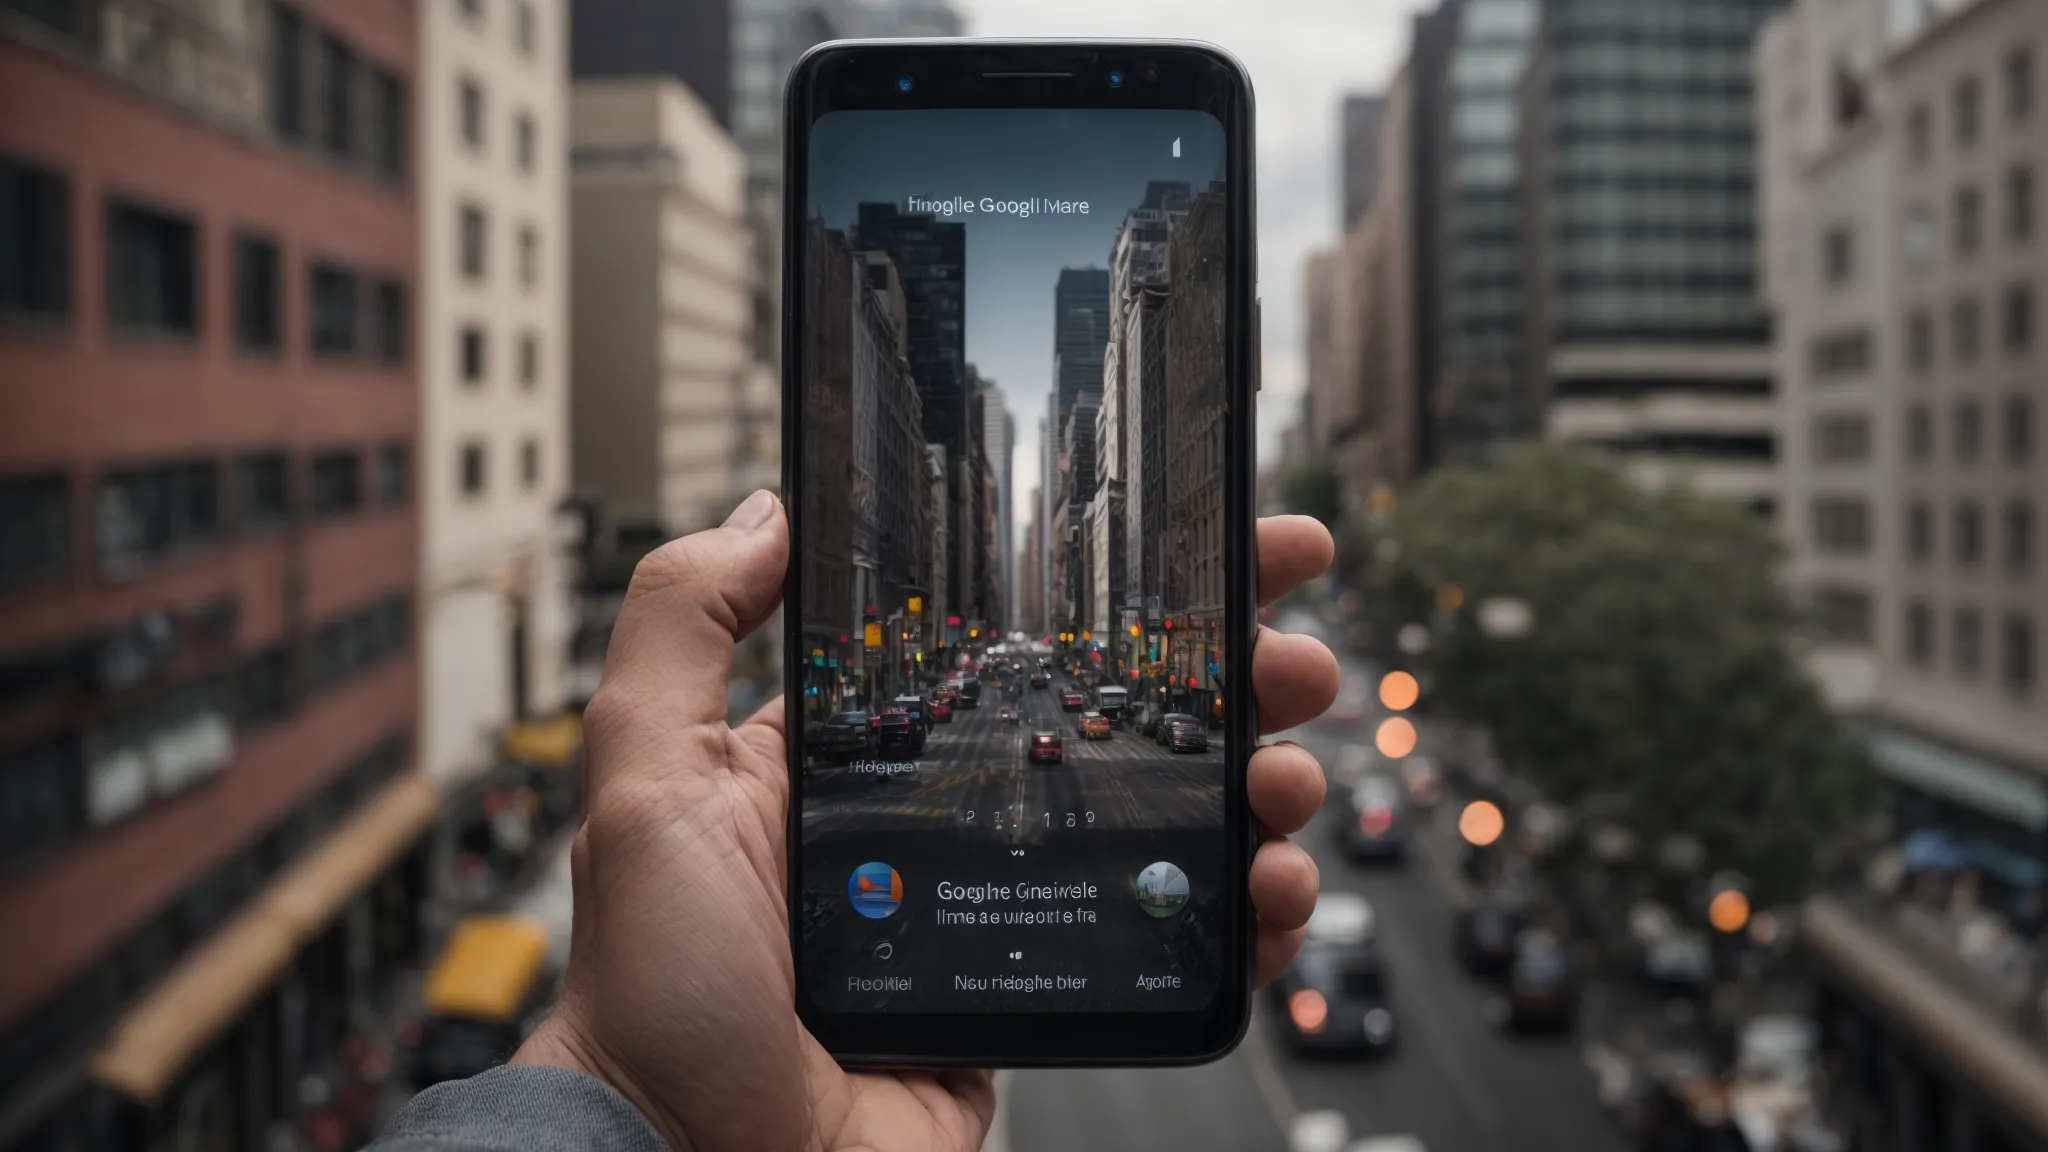 a phone displaying the updated google maps interface on its screen, held against the backdrop of a city street.